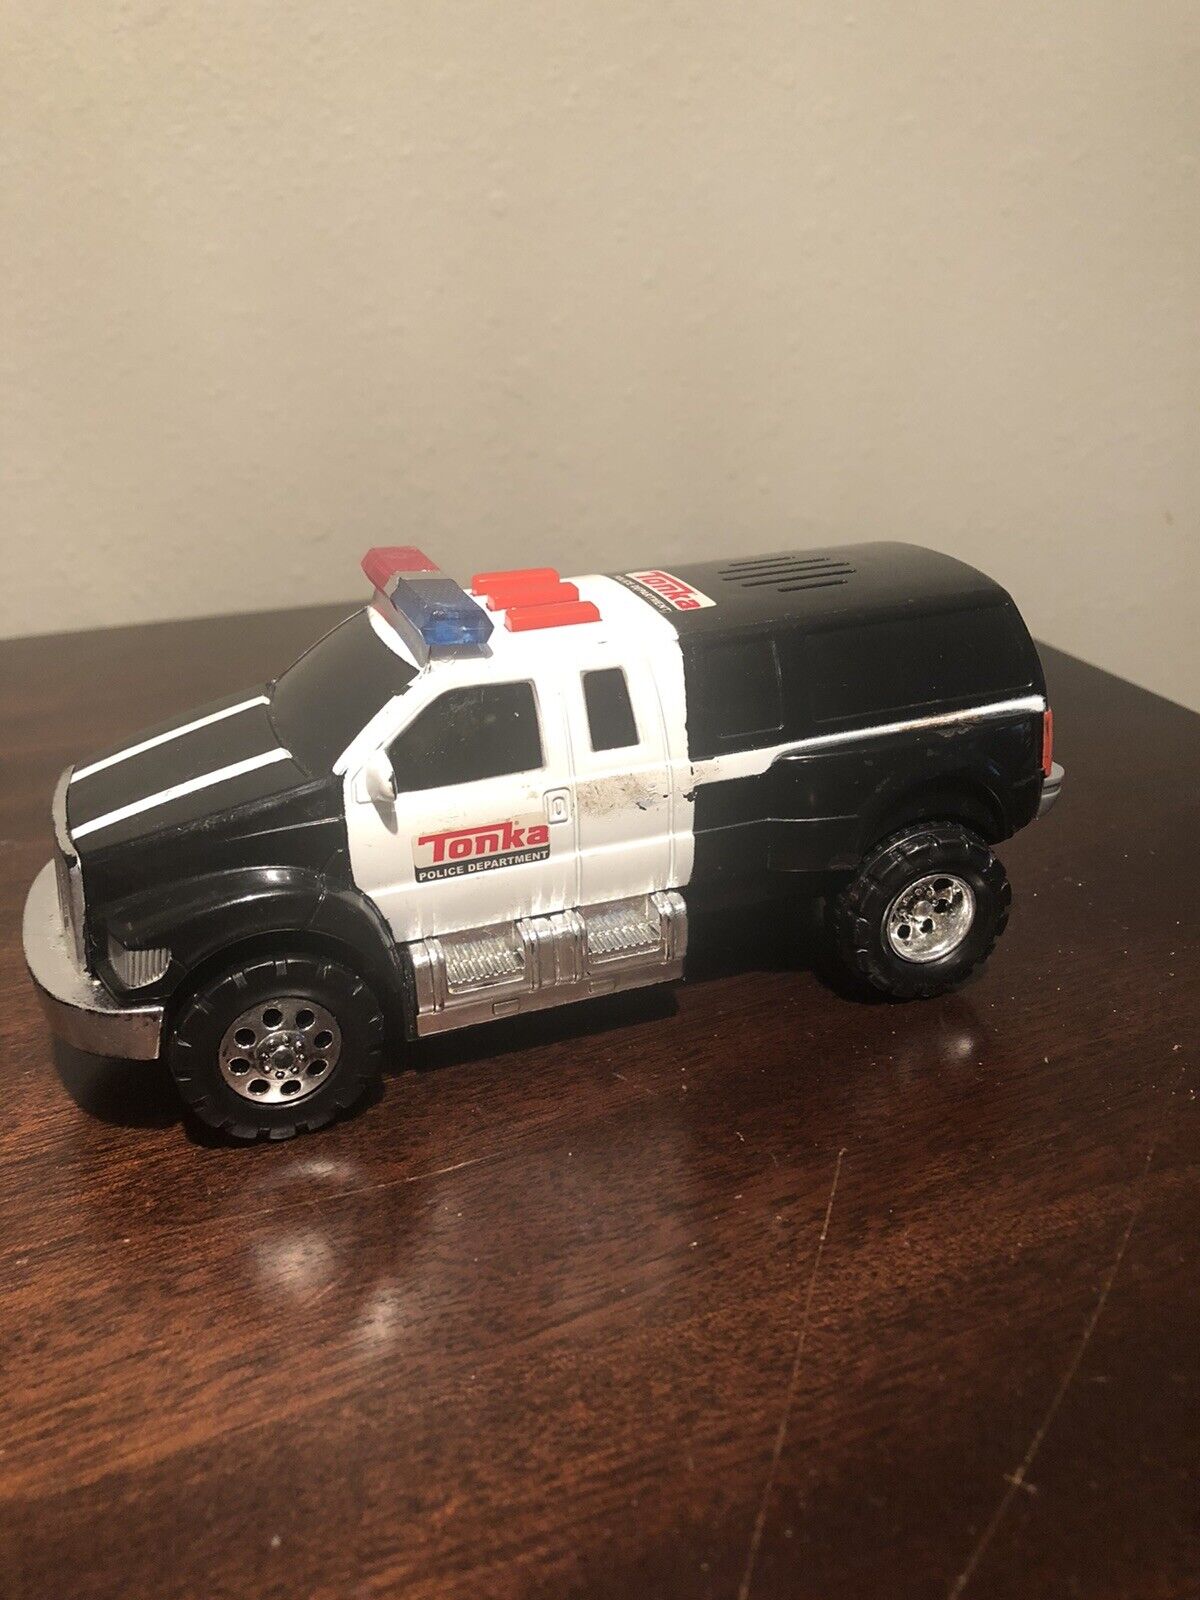 2008 Hasbro Tonka Police Department Truck Battery Operated Sounds Work